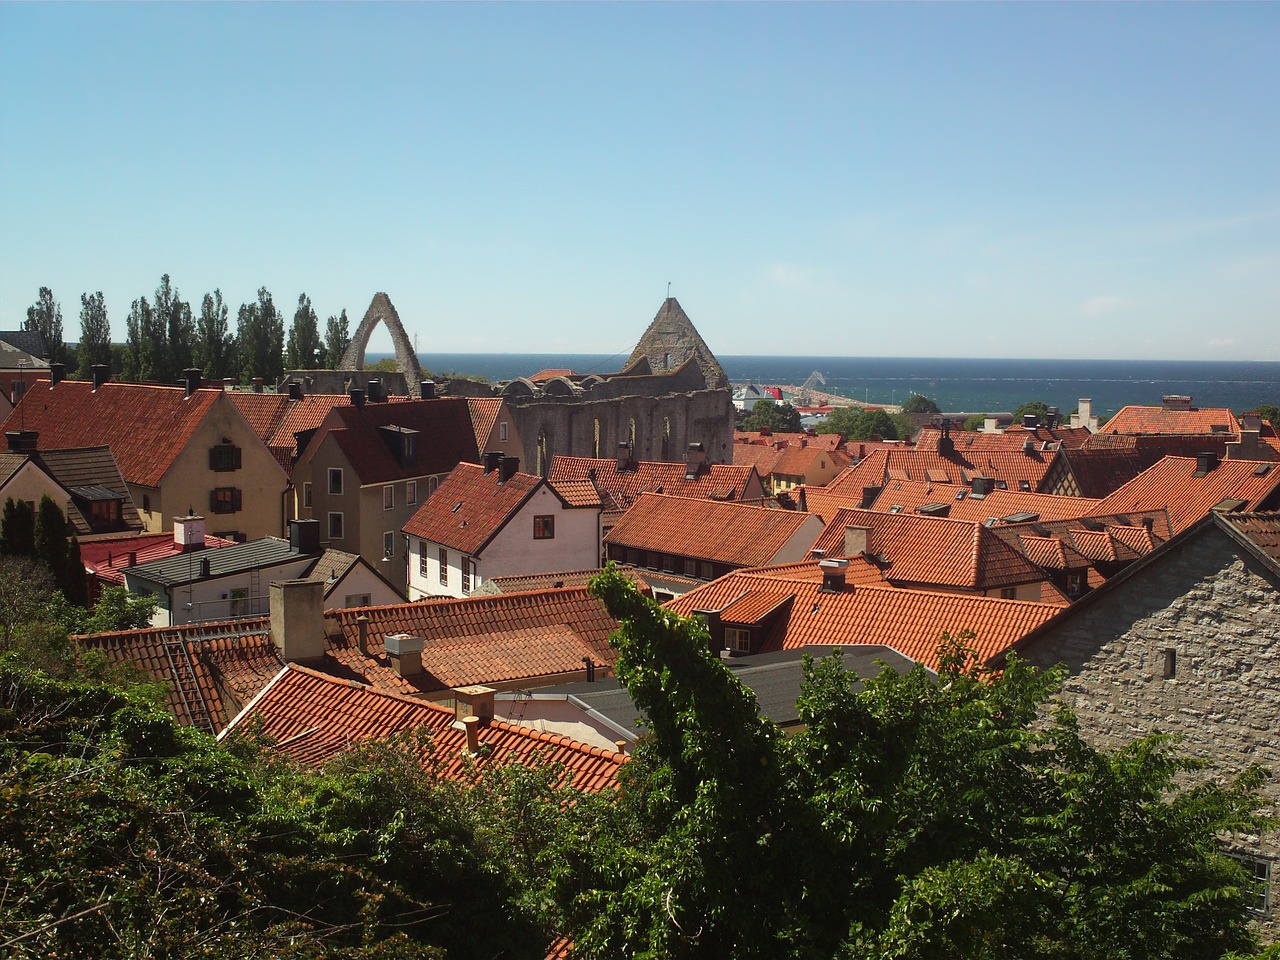 Historical and Culinary Delights in Visby